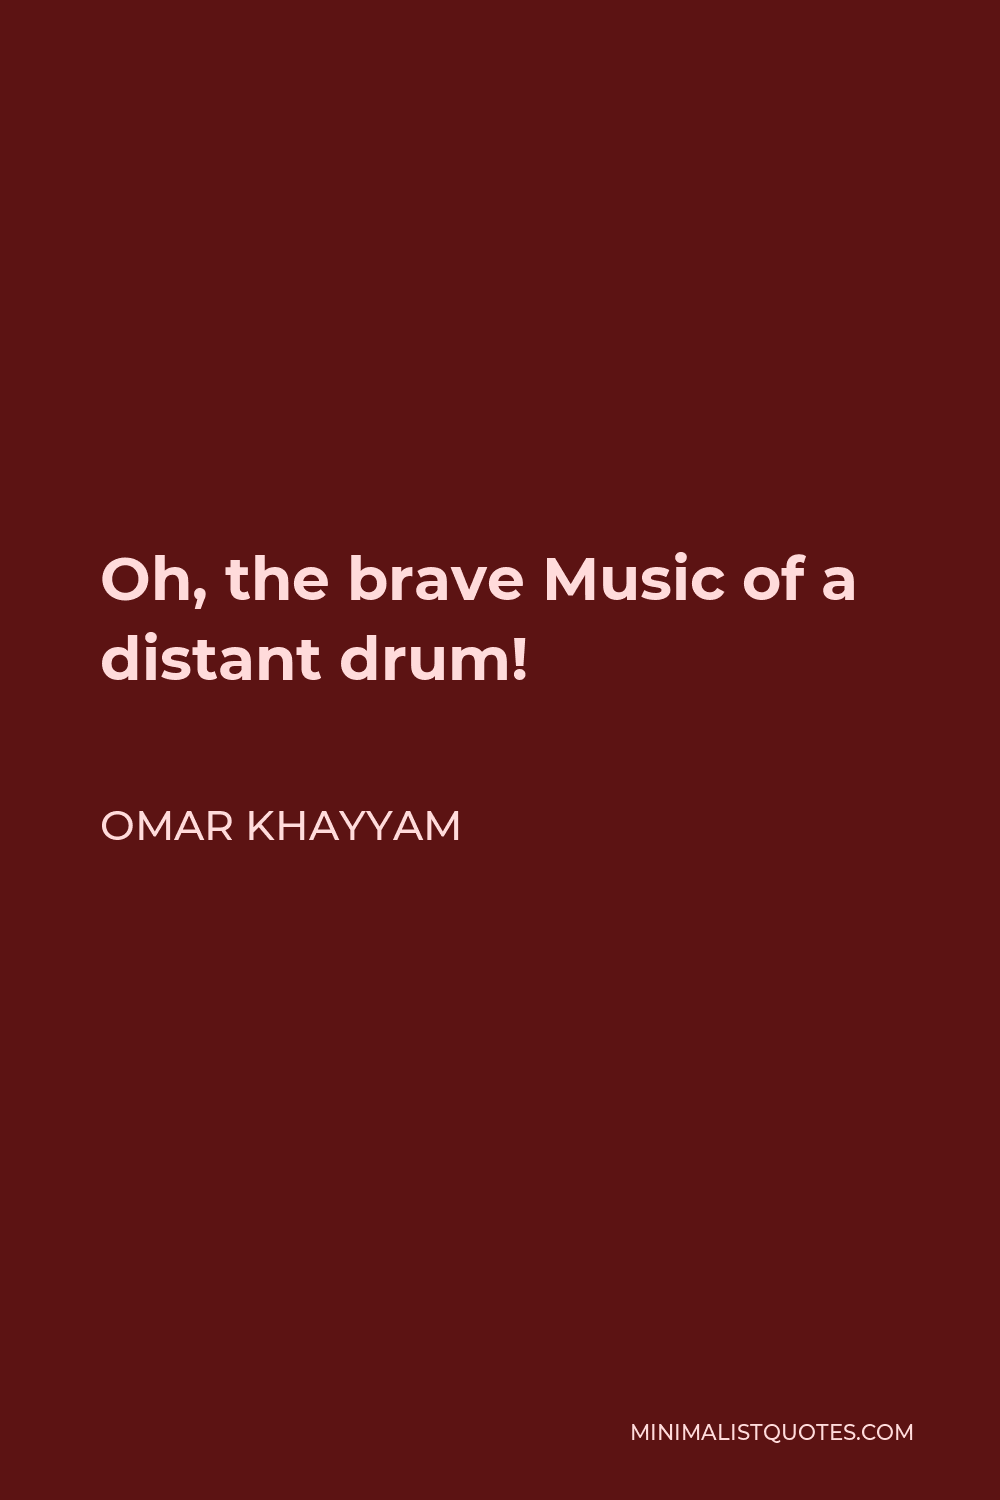 Omar Khayyam Quote - Oh, the brave Music of a distant drum!